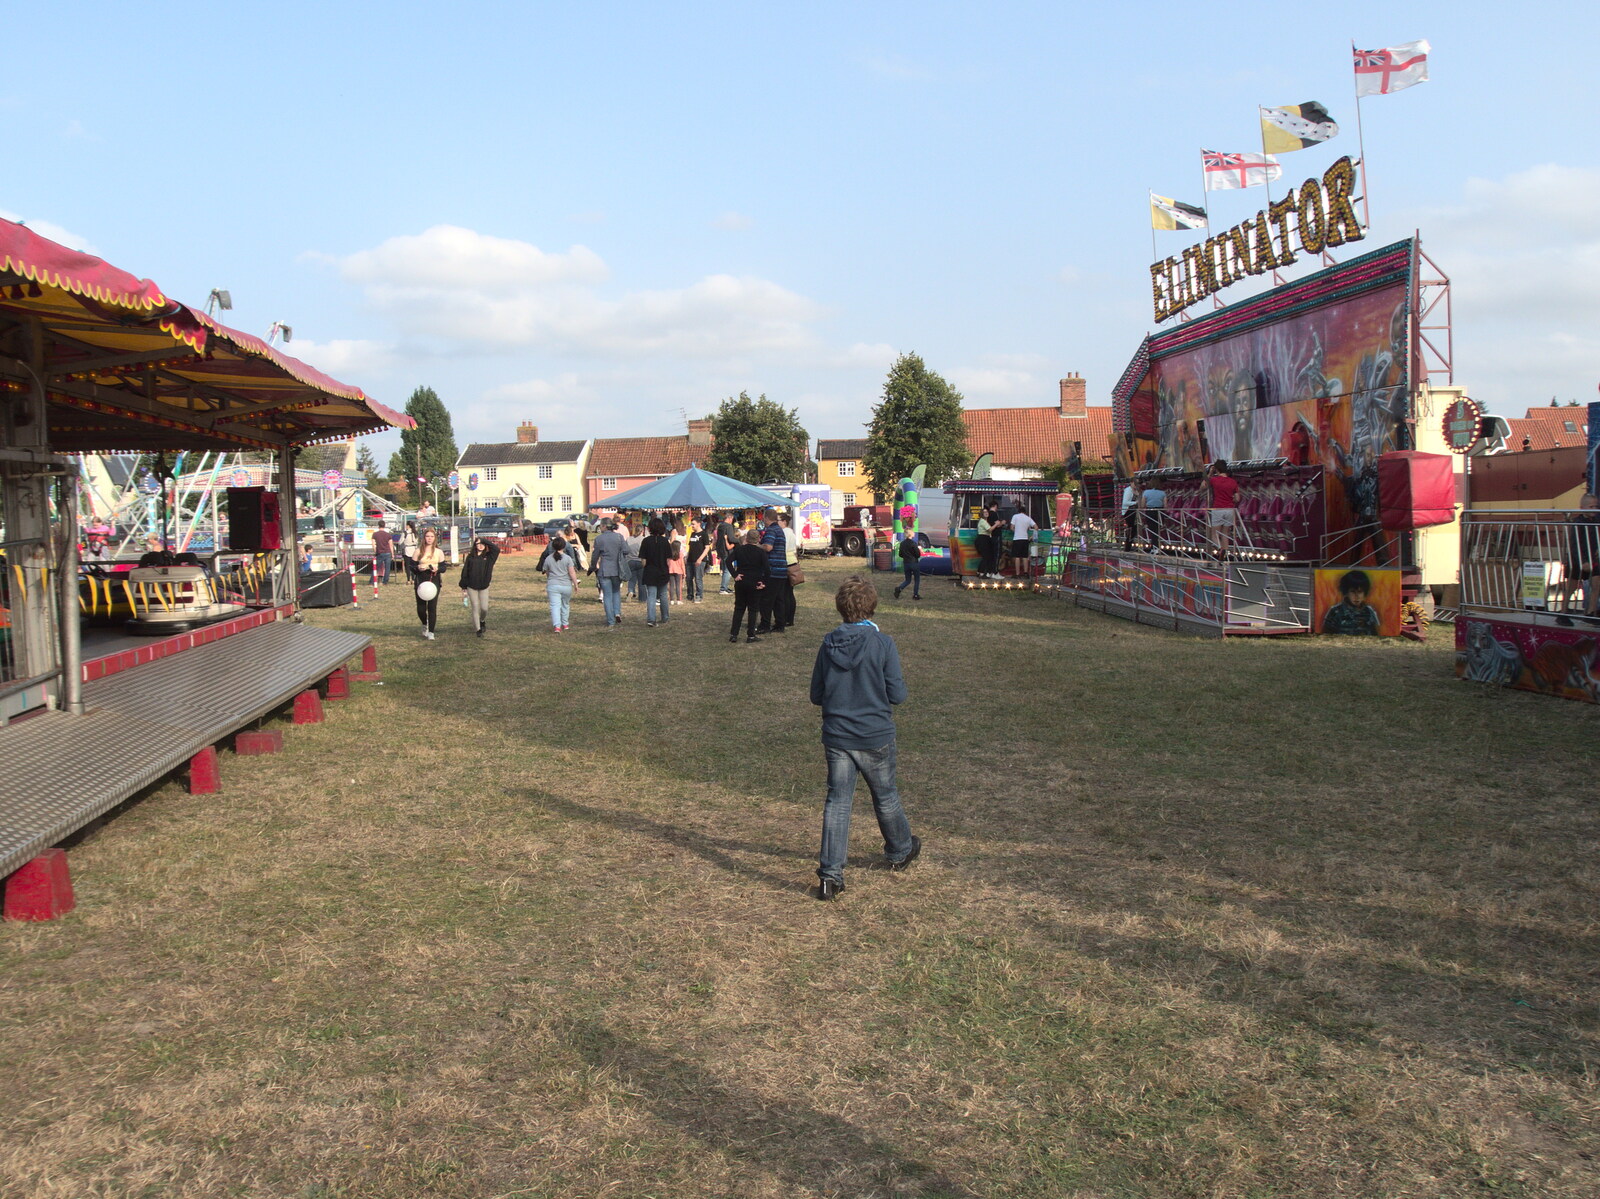 Fred roams around from A Few Hours at the Fair, Fair Green, Diss, Norfolk - 5th September 2021